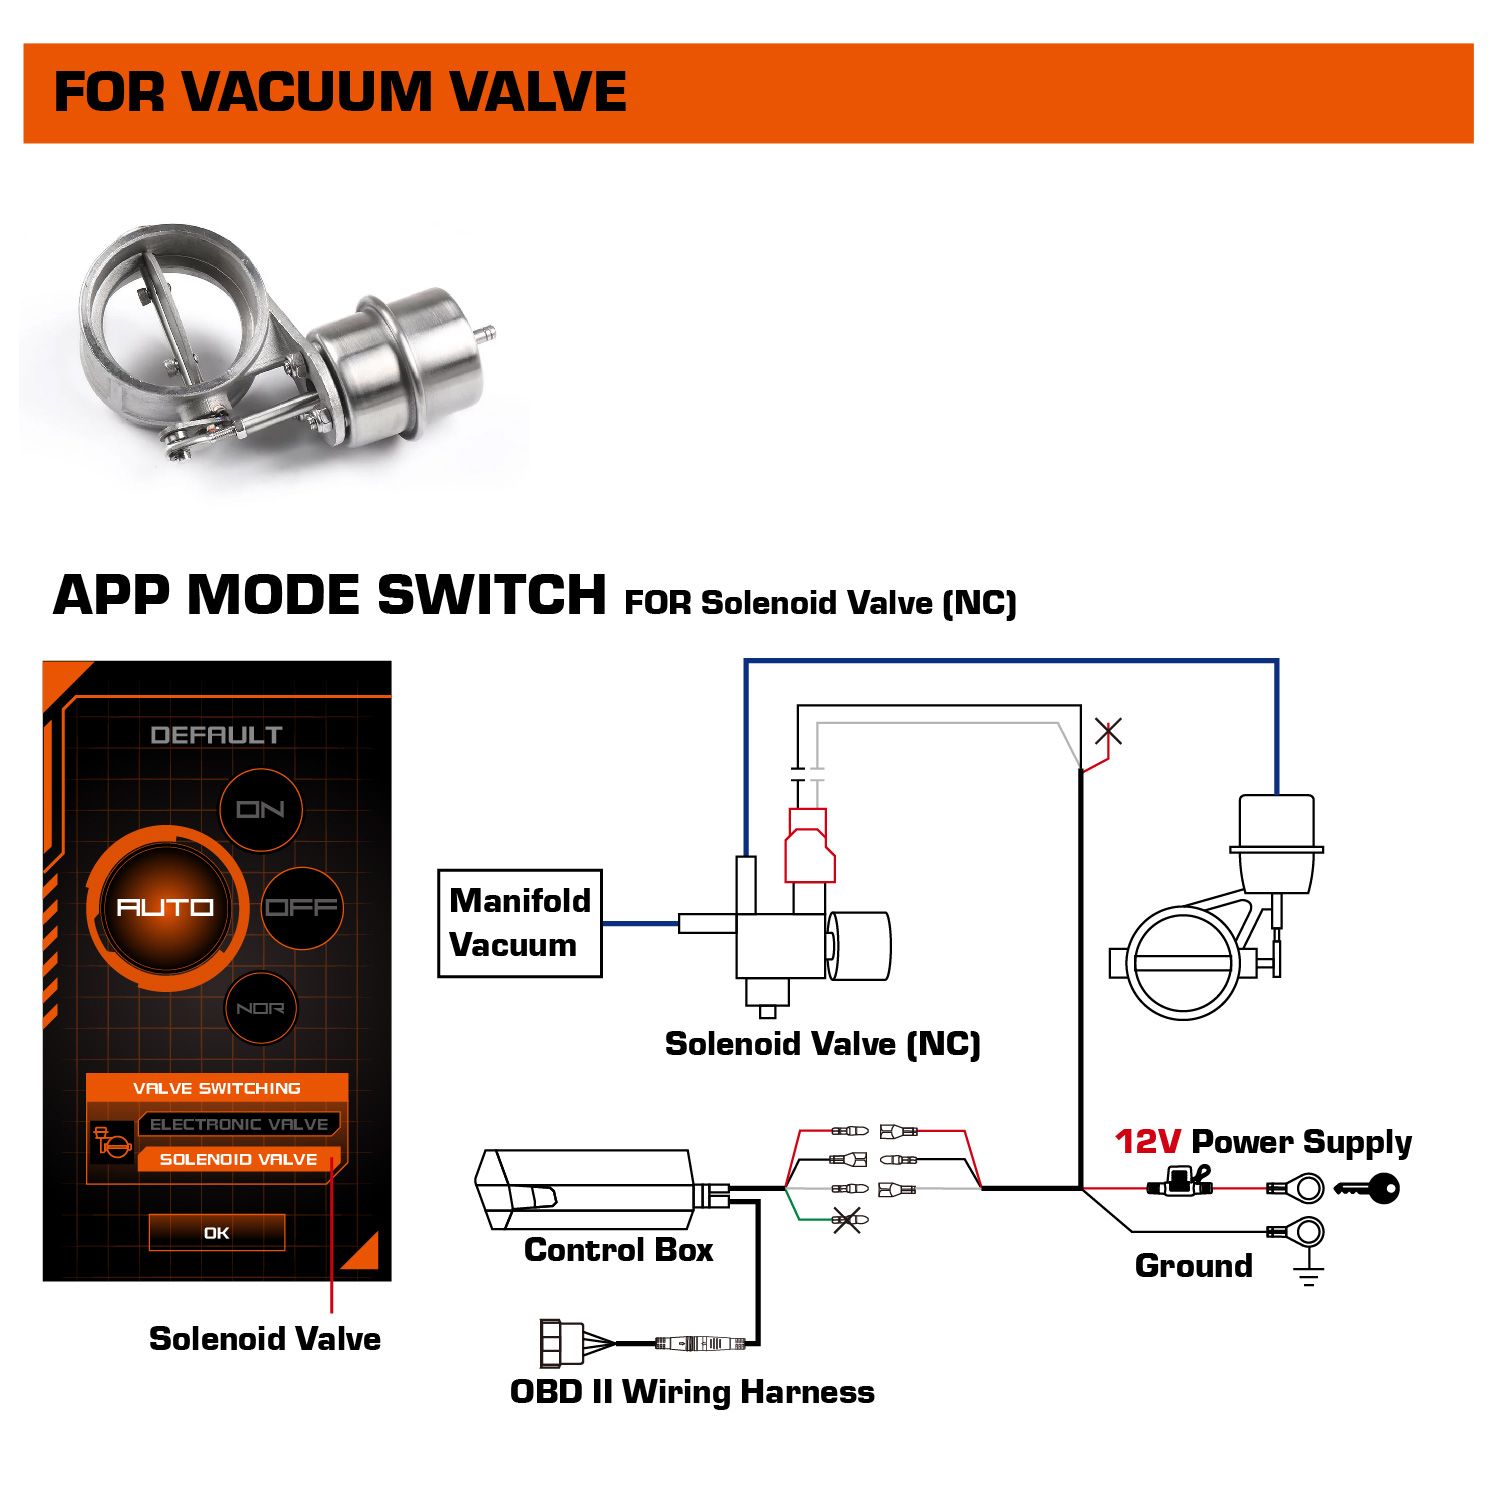 Shadow Electronic Exhaust Valve Controller-can use in vacuum exhaust valve